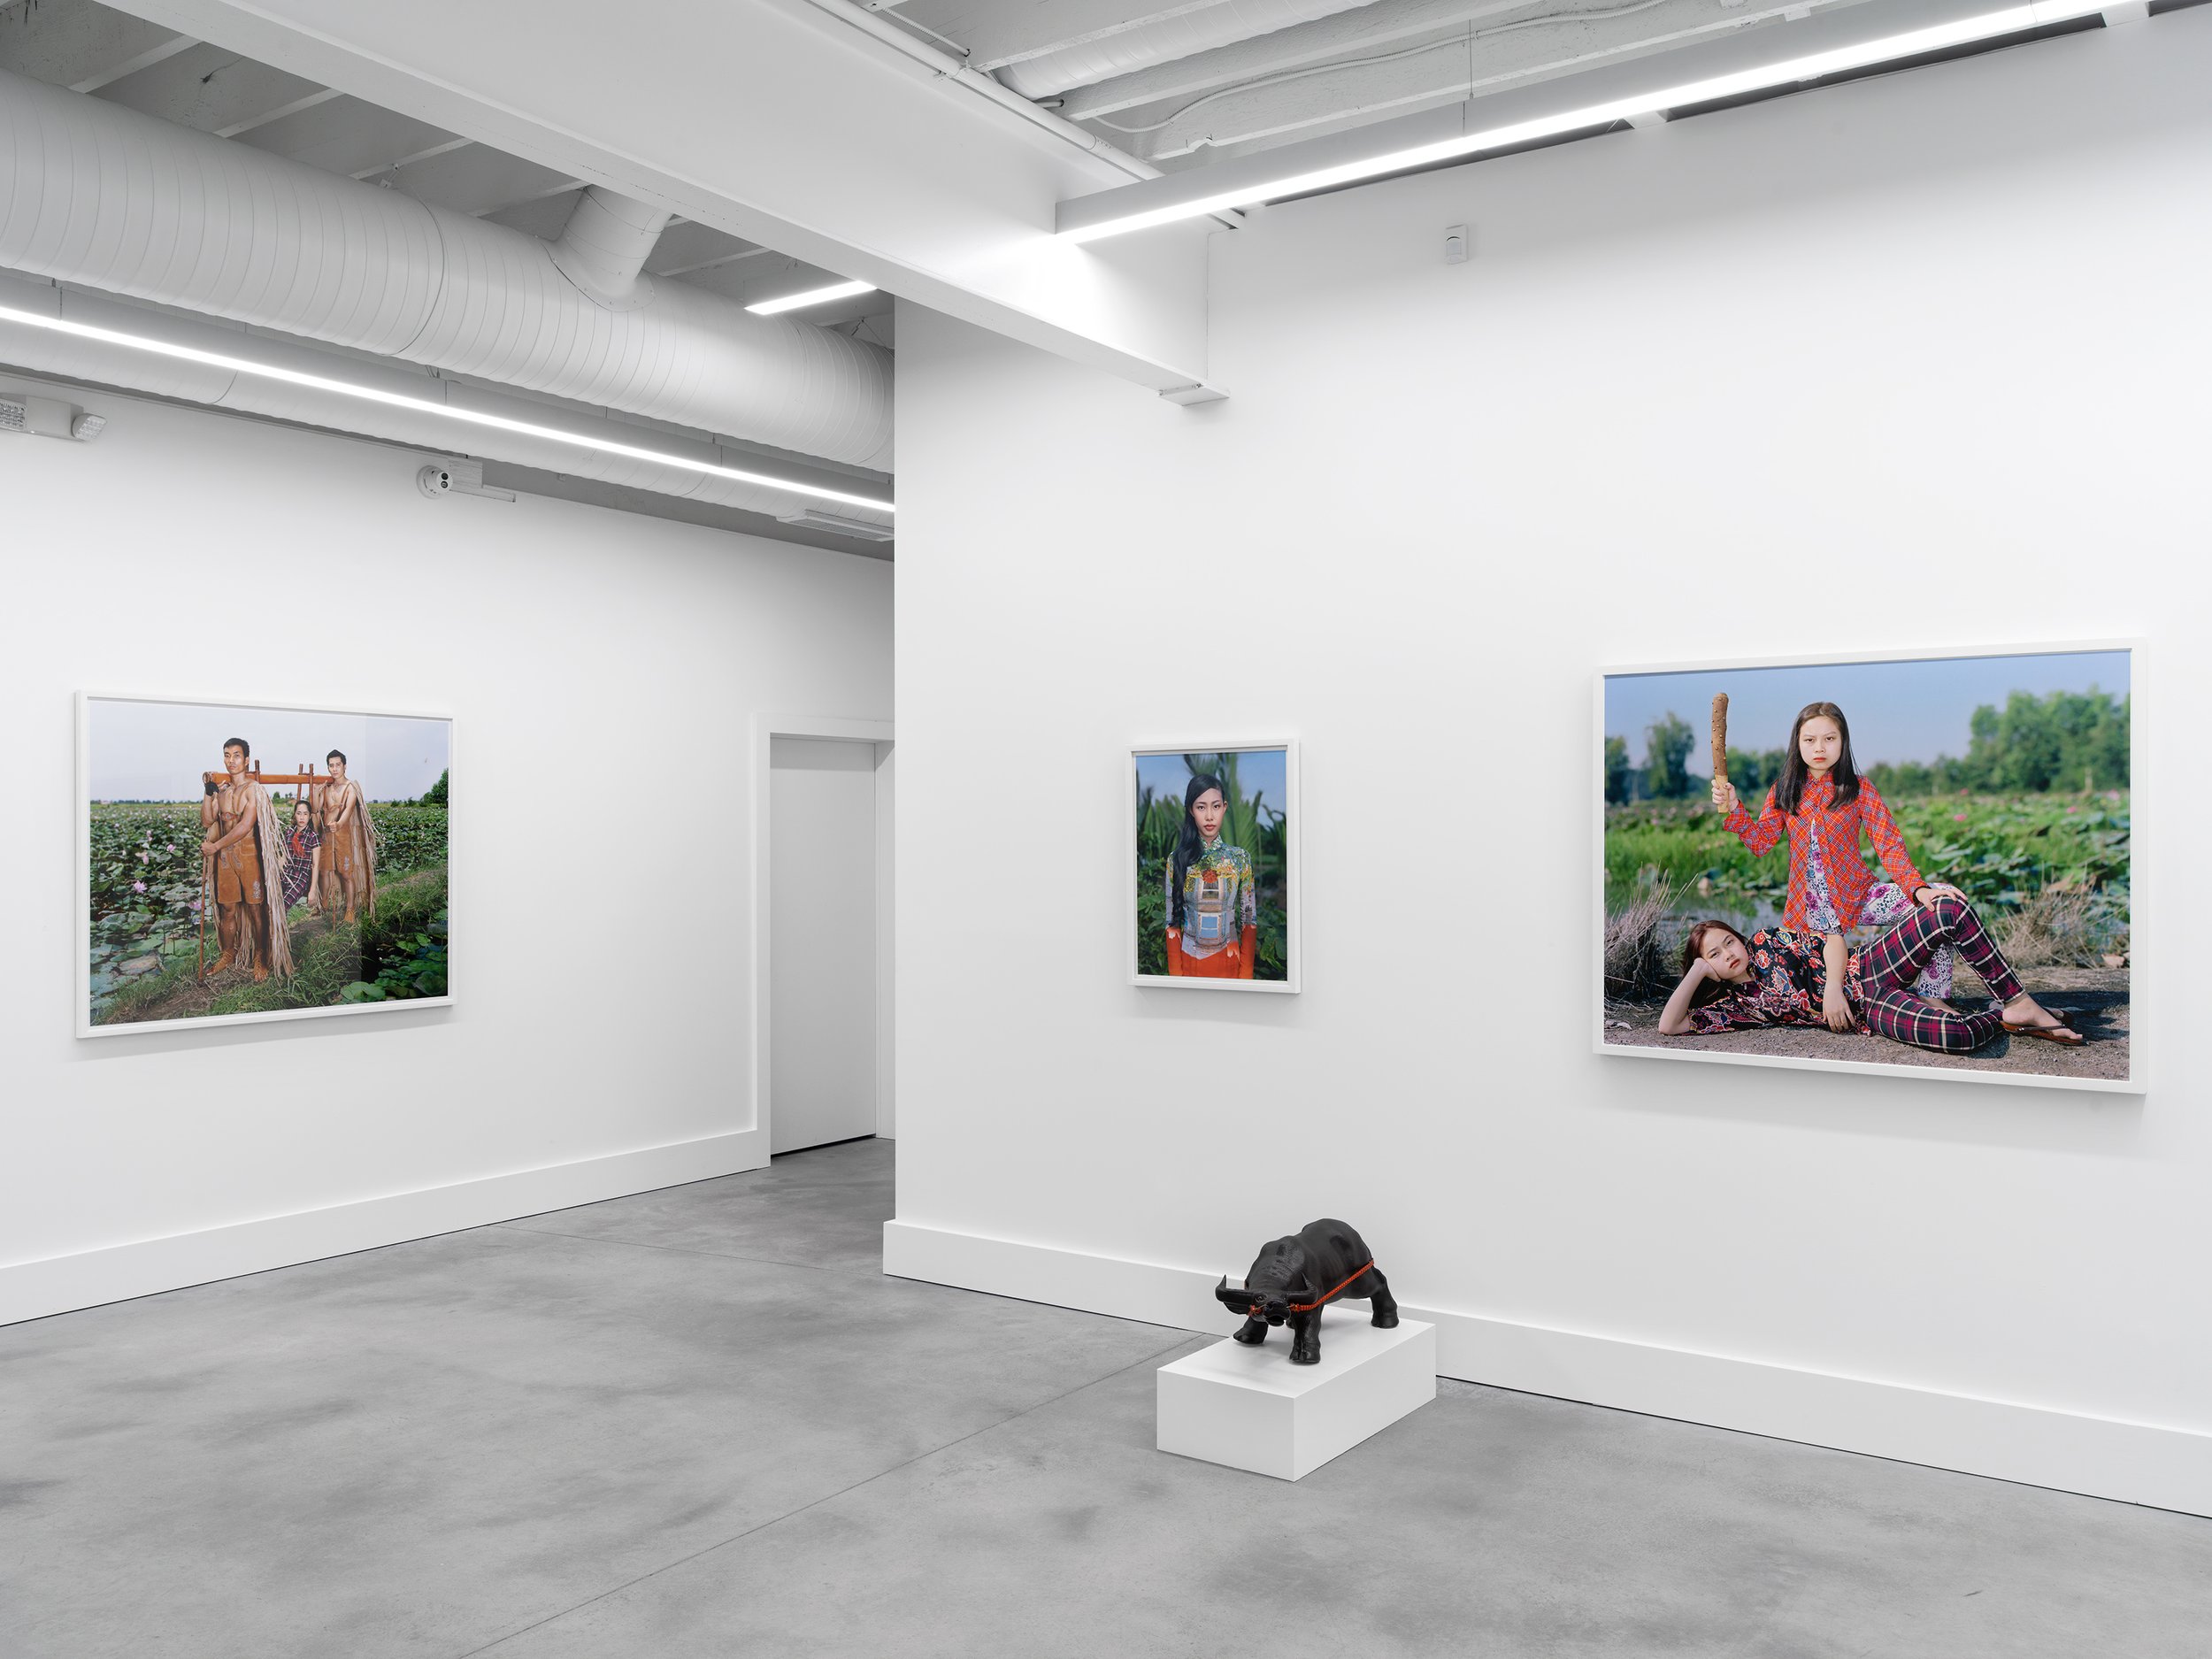  Installation view of Olivier Laude:    Chiến Thắng Ba Tơ  left to right:  Cáng, Tuyền Vestida, The Wrongerers, &amp; Untitled (Buffalo)  